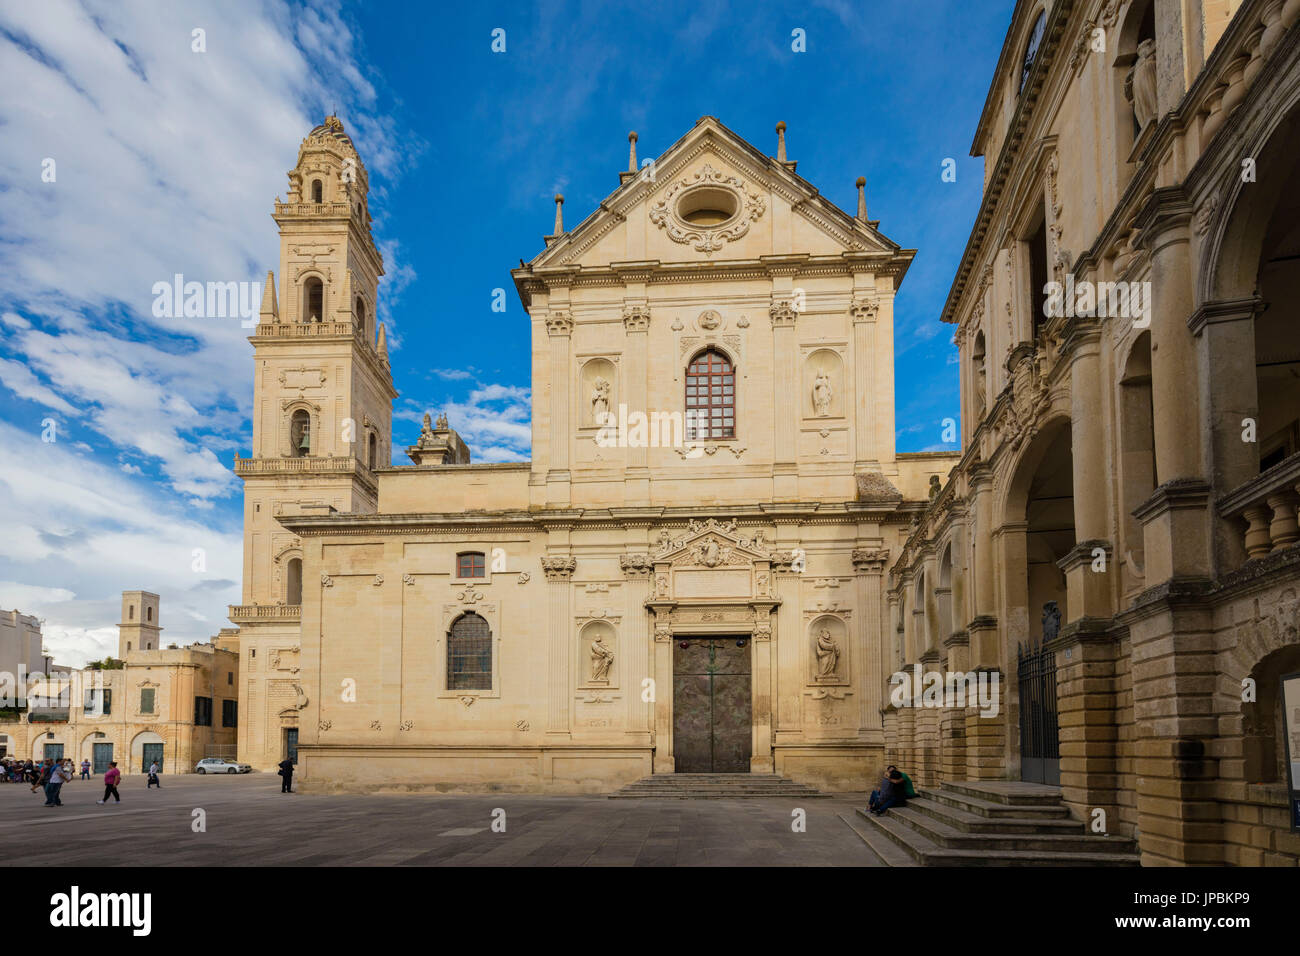 The Baroque style of the ancient Lecce Cathedral in the old town Apulia Italy Europe Stock Photo